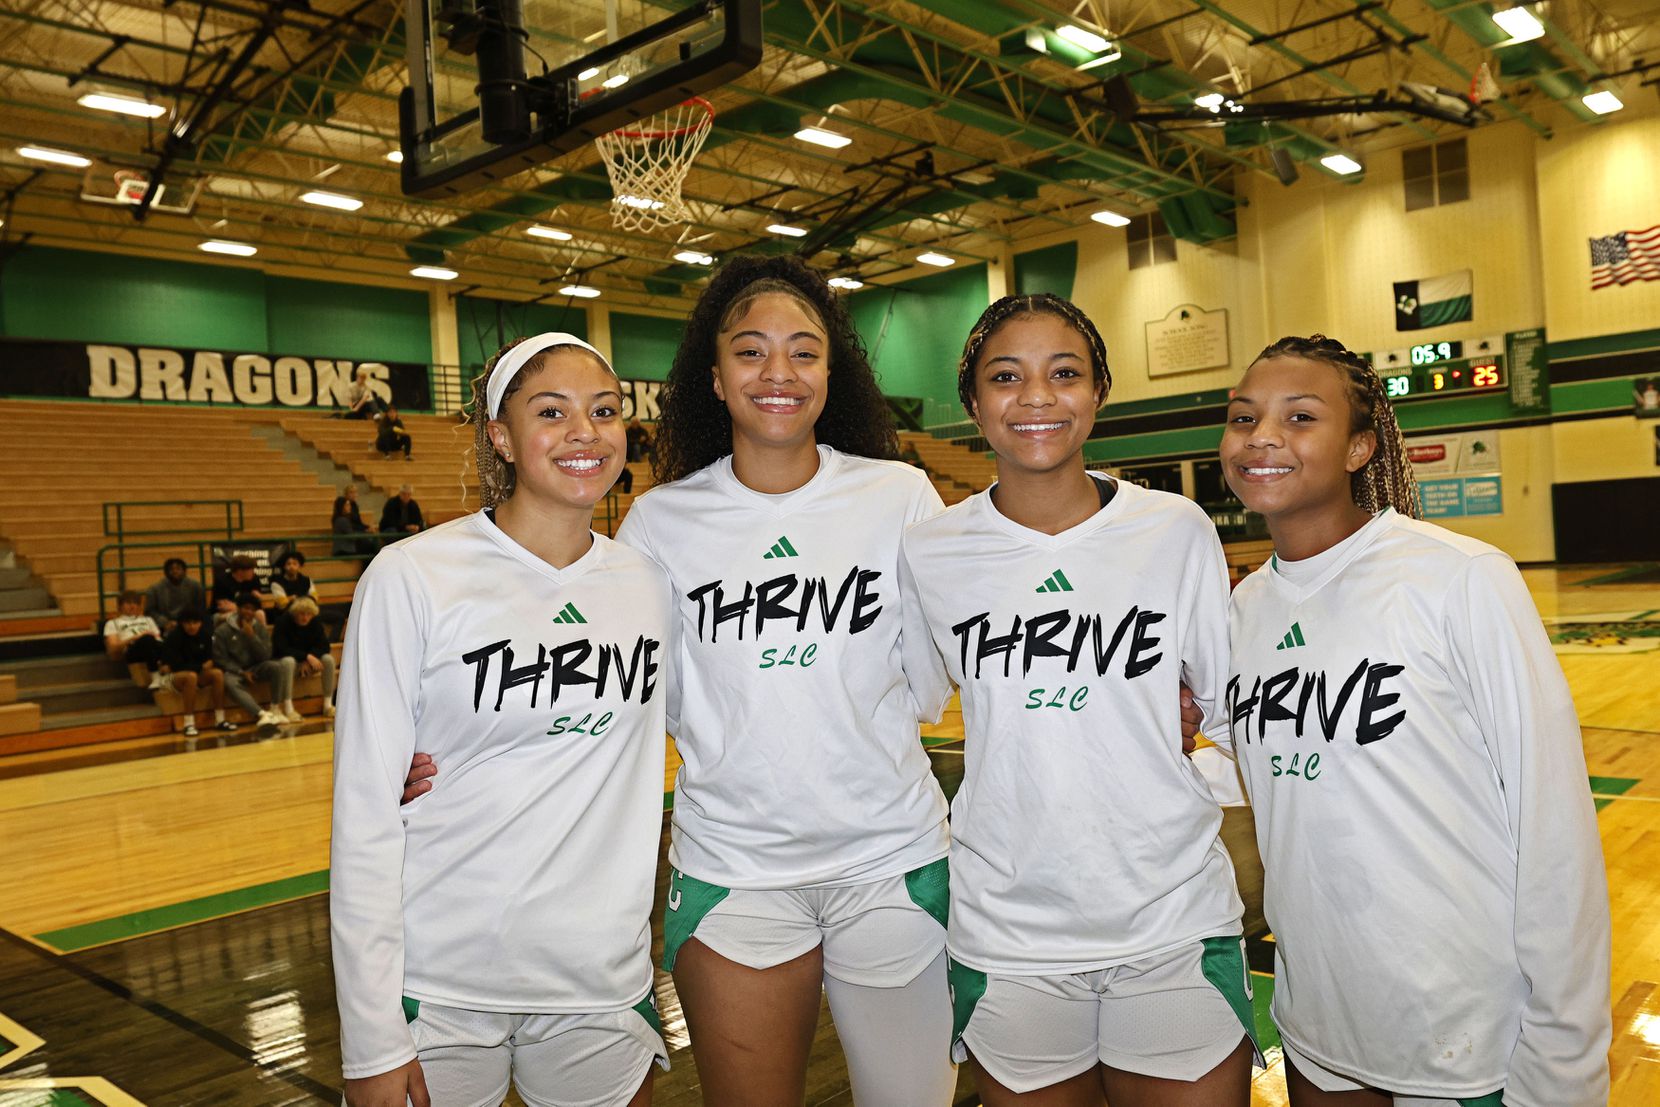 Southlake sister act: Meet the four Jordan sisters starring for